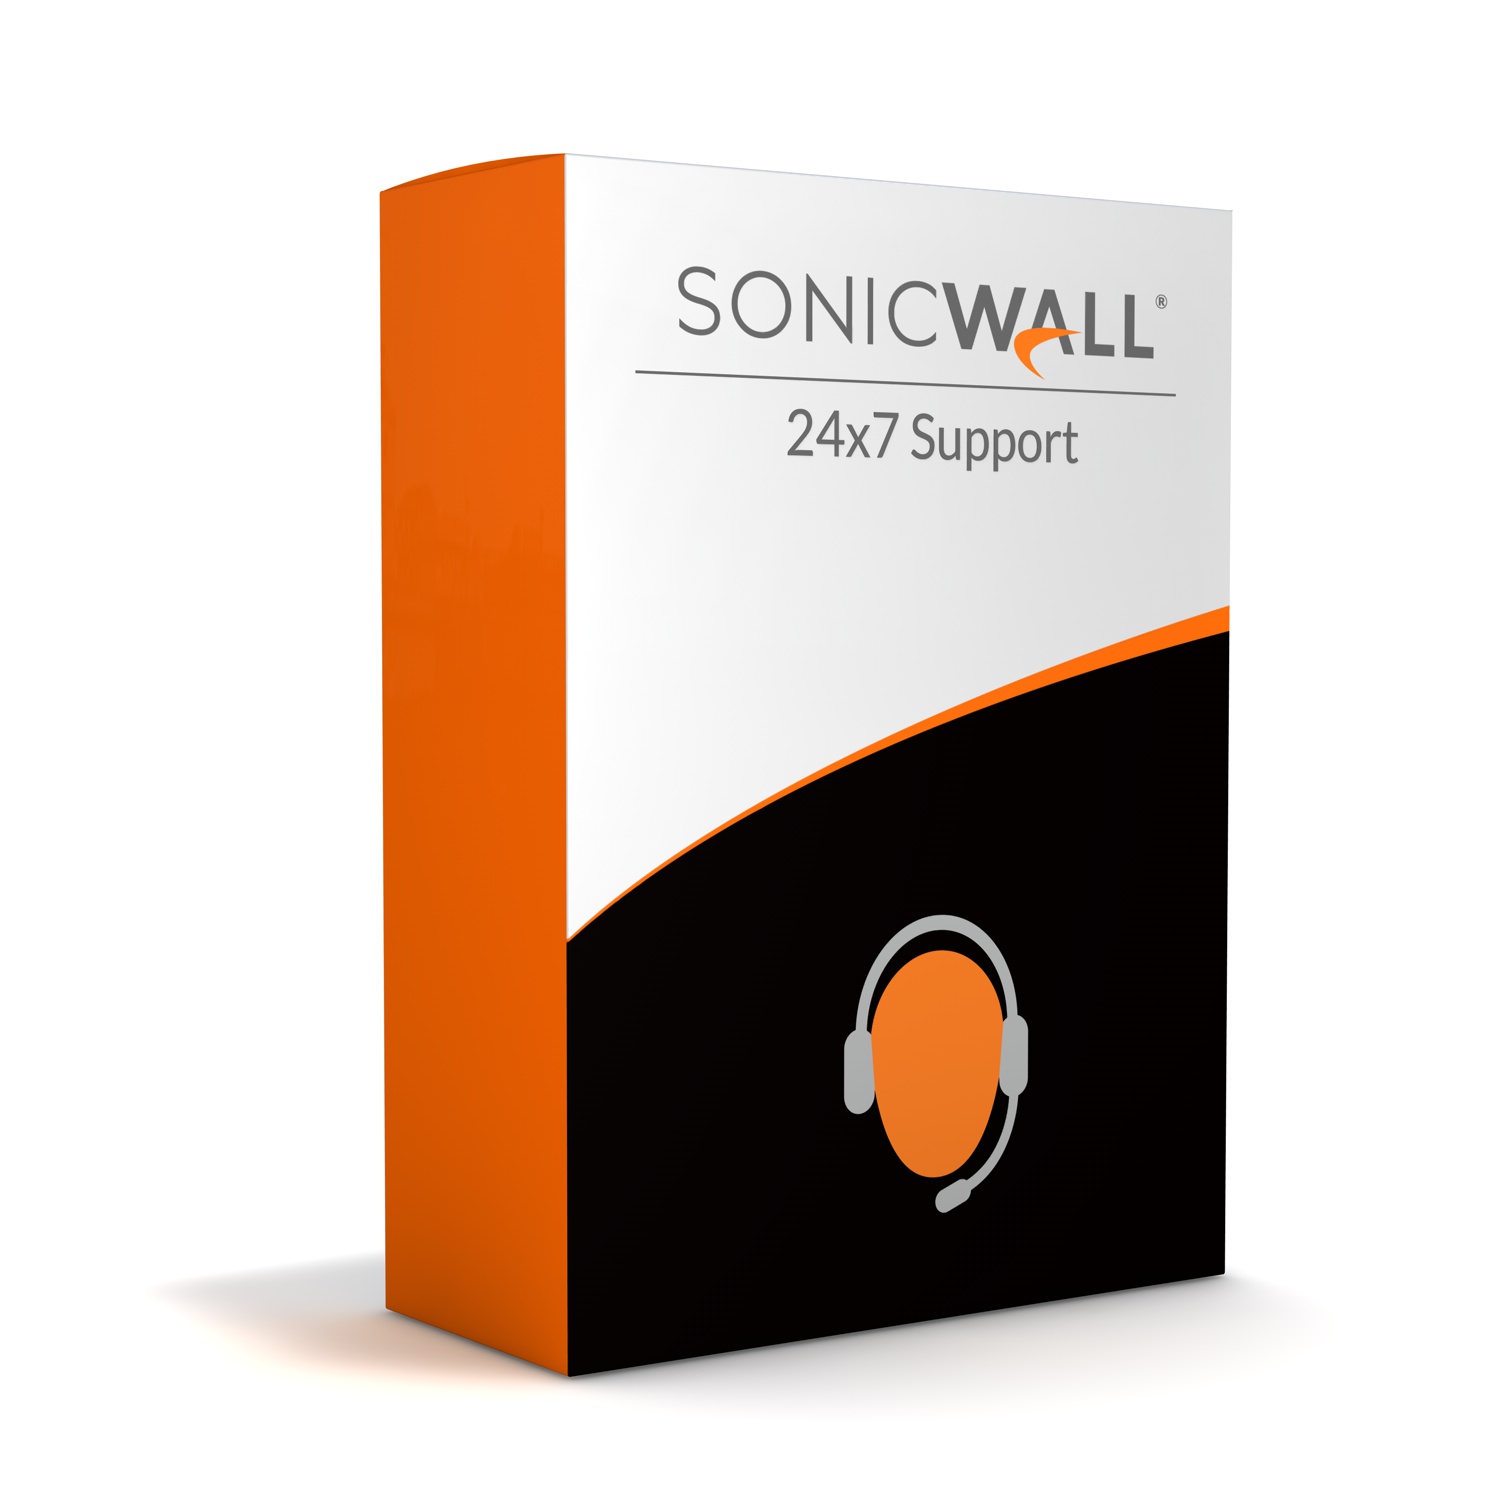 02-SSC-6639 SonicWall 3 Year 24x7 Support for TZ270 